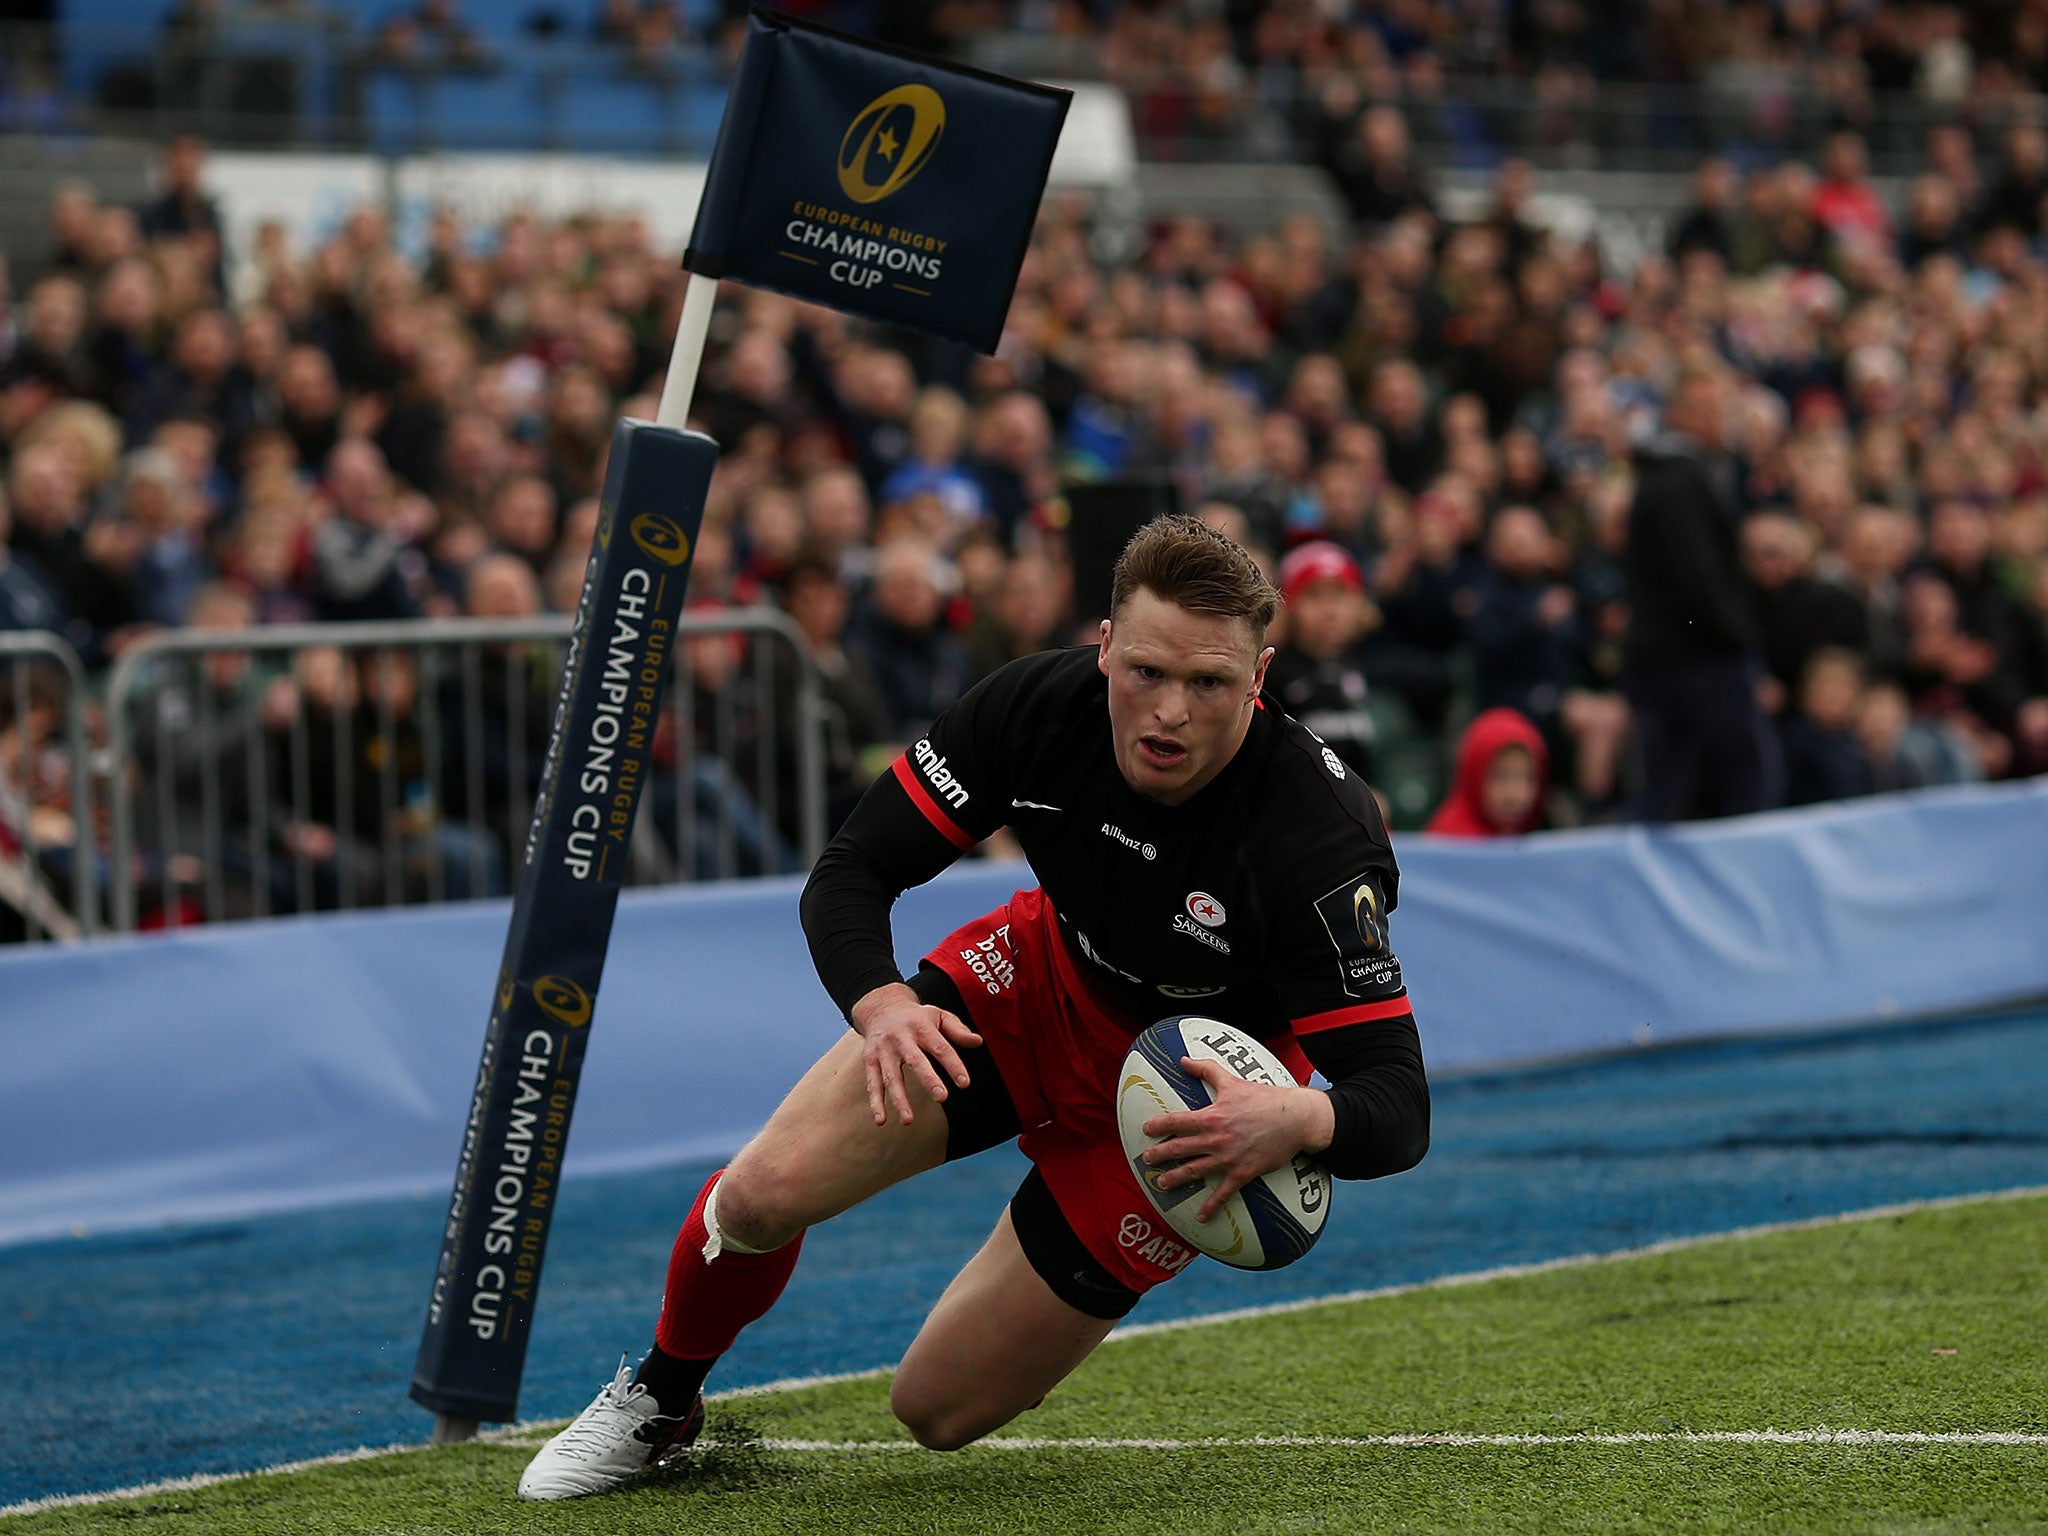 Chris Ashton dives over for one of his three tries for Saracens